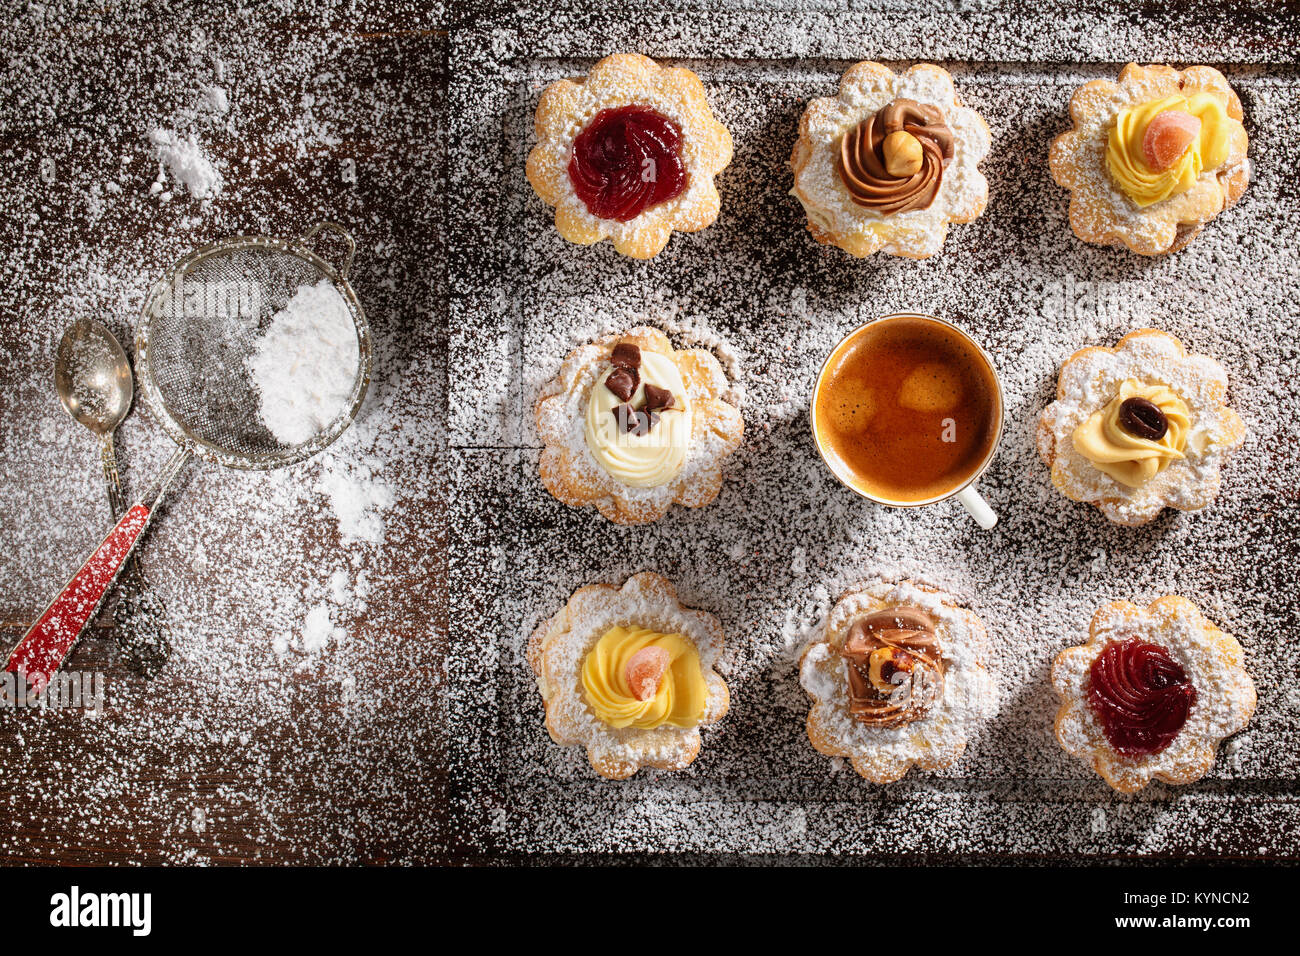 Cookies with jelly, cream and powdered sugar. Stock Photo